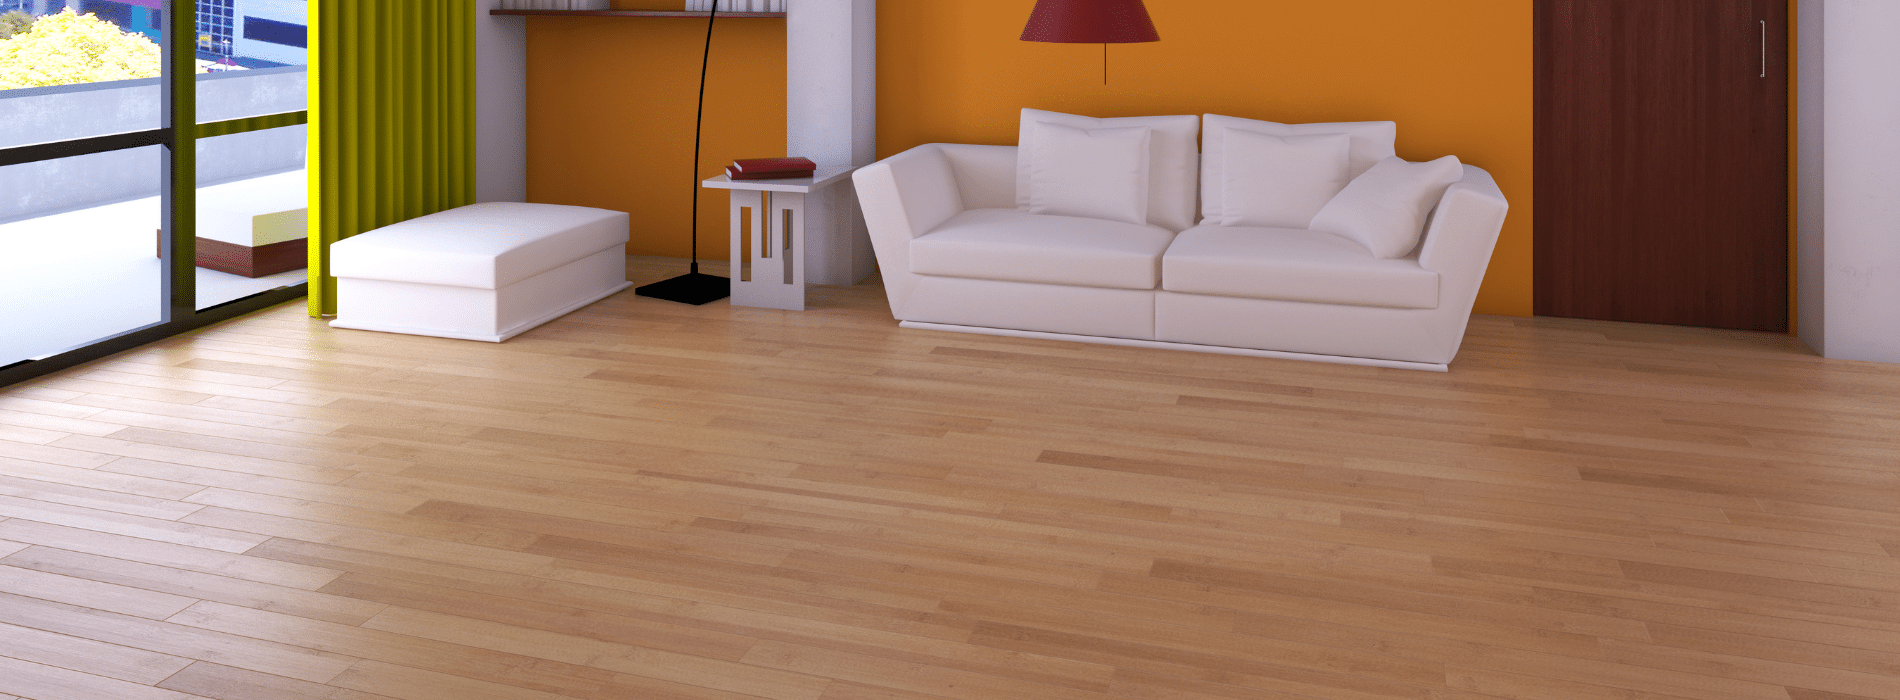 Exquisitely restored 5-year-old hardwood floor in West Ham, E15 by Mr Sander®. Bona 2K Frost whitewashing and Traffic HD 10% sheen matte lacquer result in a durable and stunning finish. Enjoy timeless elegance with this expertly crafted floor.